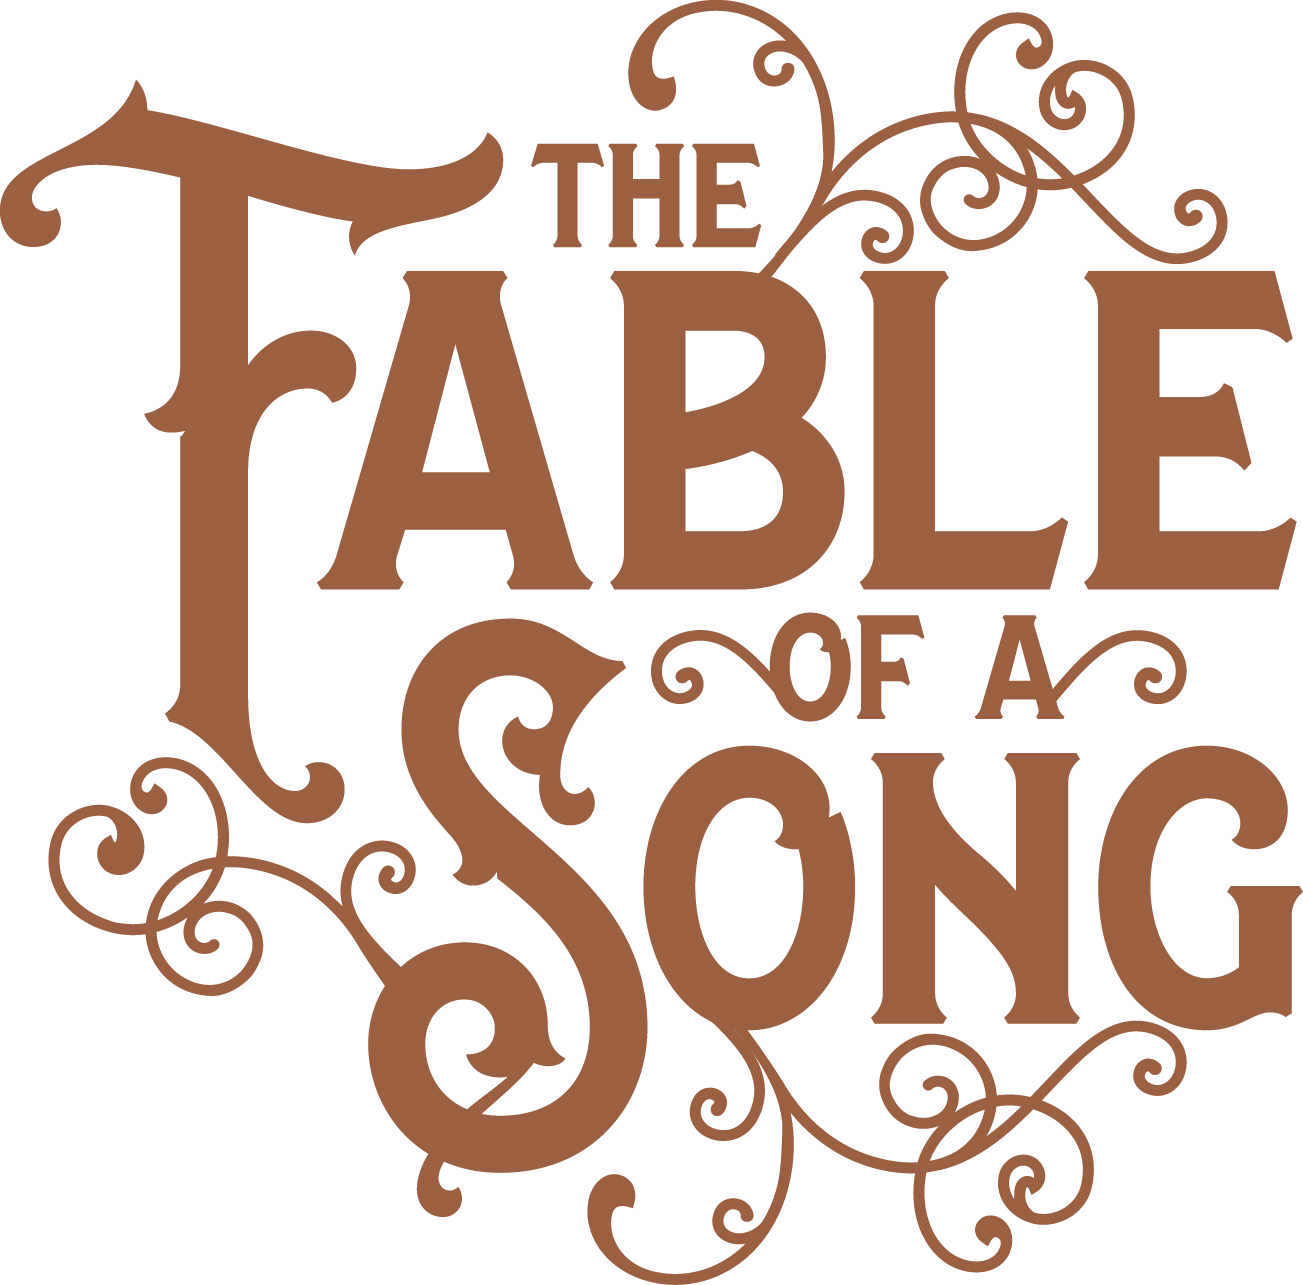 THE FABLE OF A SONG